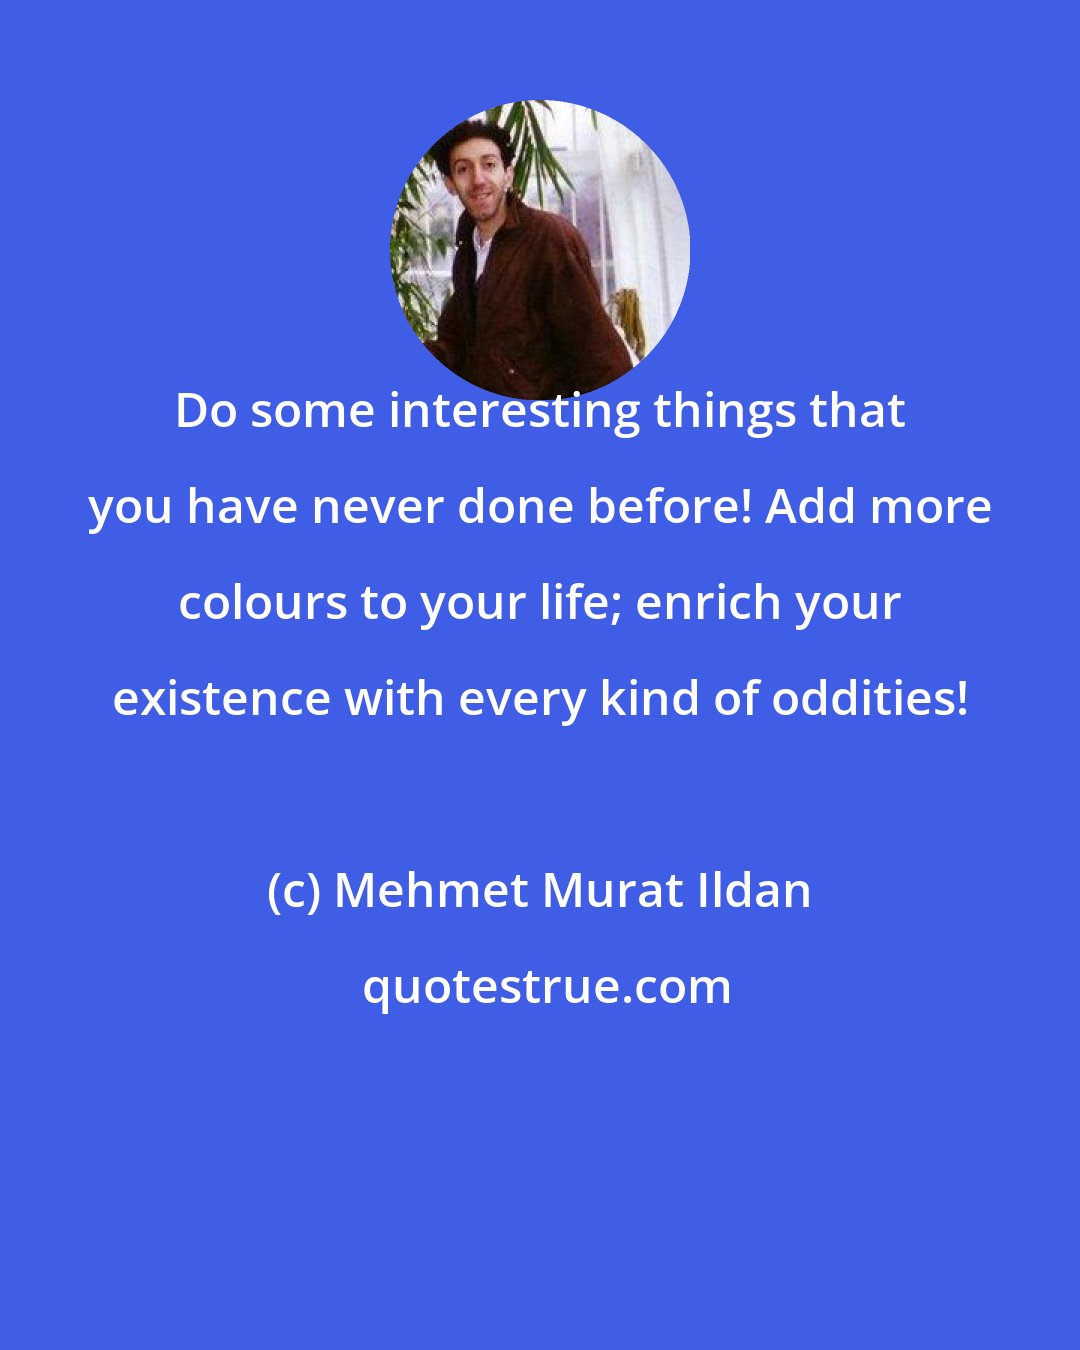 Mehmet Murat Ildan: Do some interesting things that you have never done before! Add more colours to your life; enrich your existence with every kind of oddities!